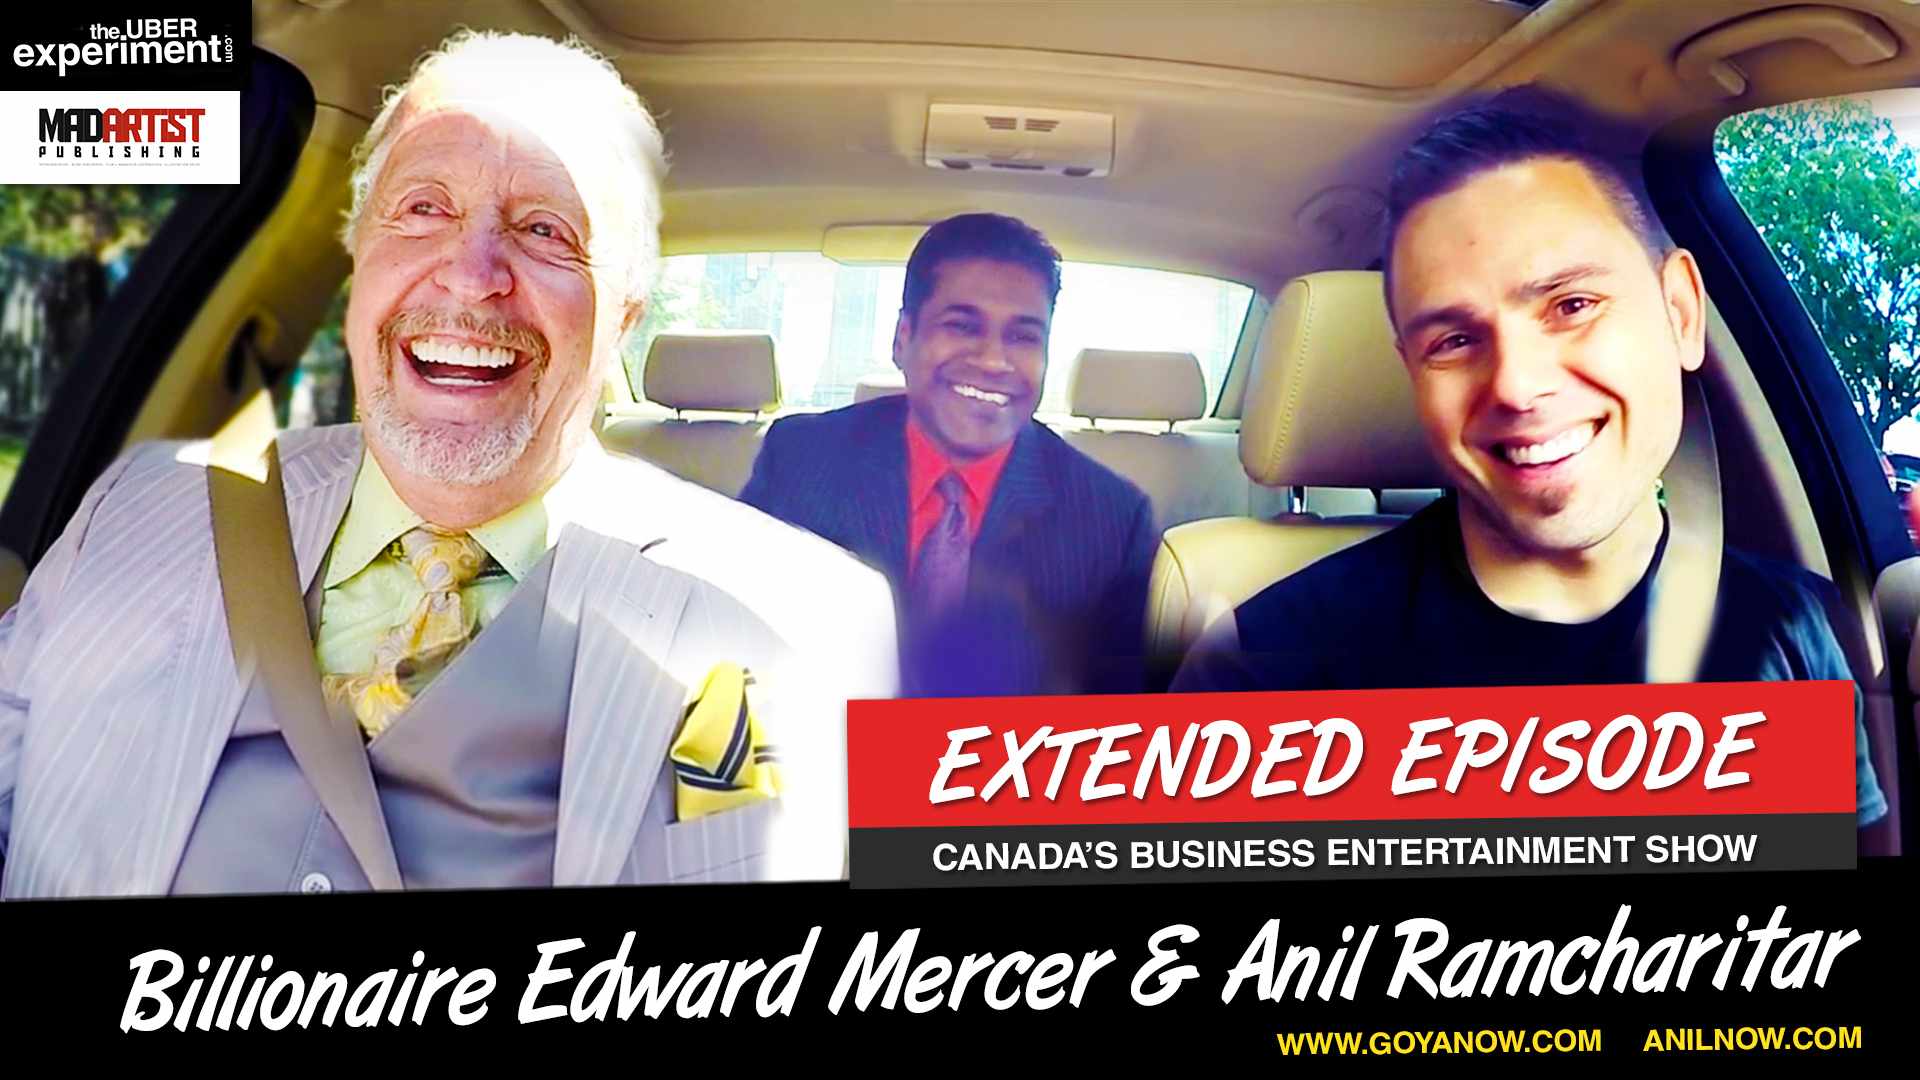 DO U HAVE WHAT IT TAKES TO BE A MILLIONAIRE? Ed Mercer & Anil Ramcharitar ride The UBER Experiment